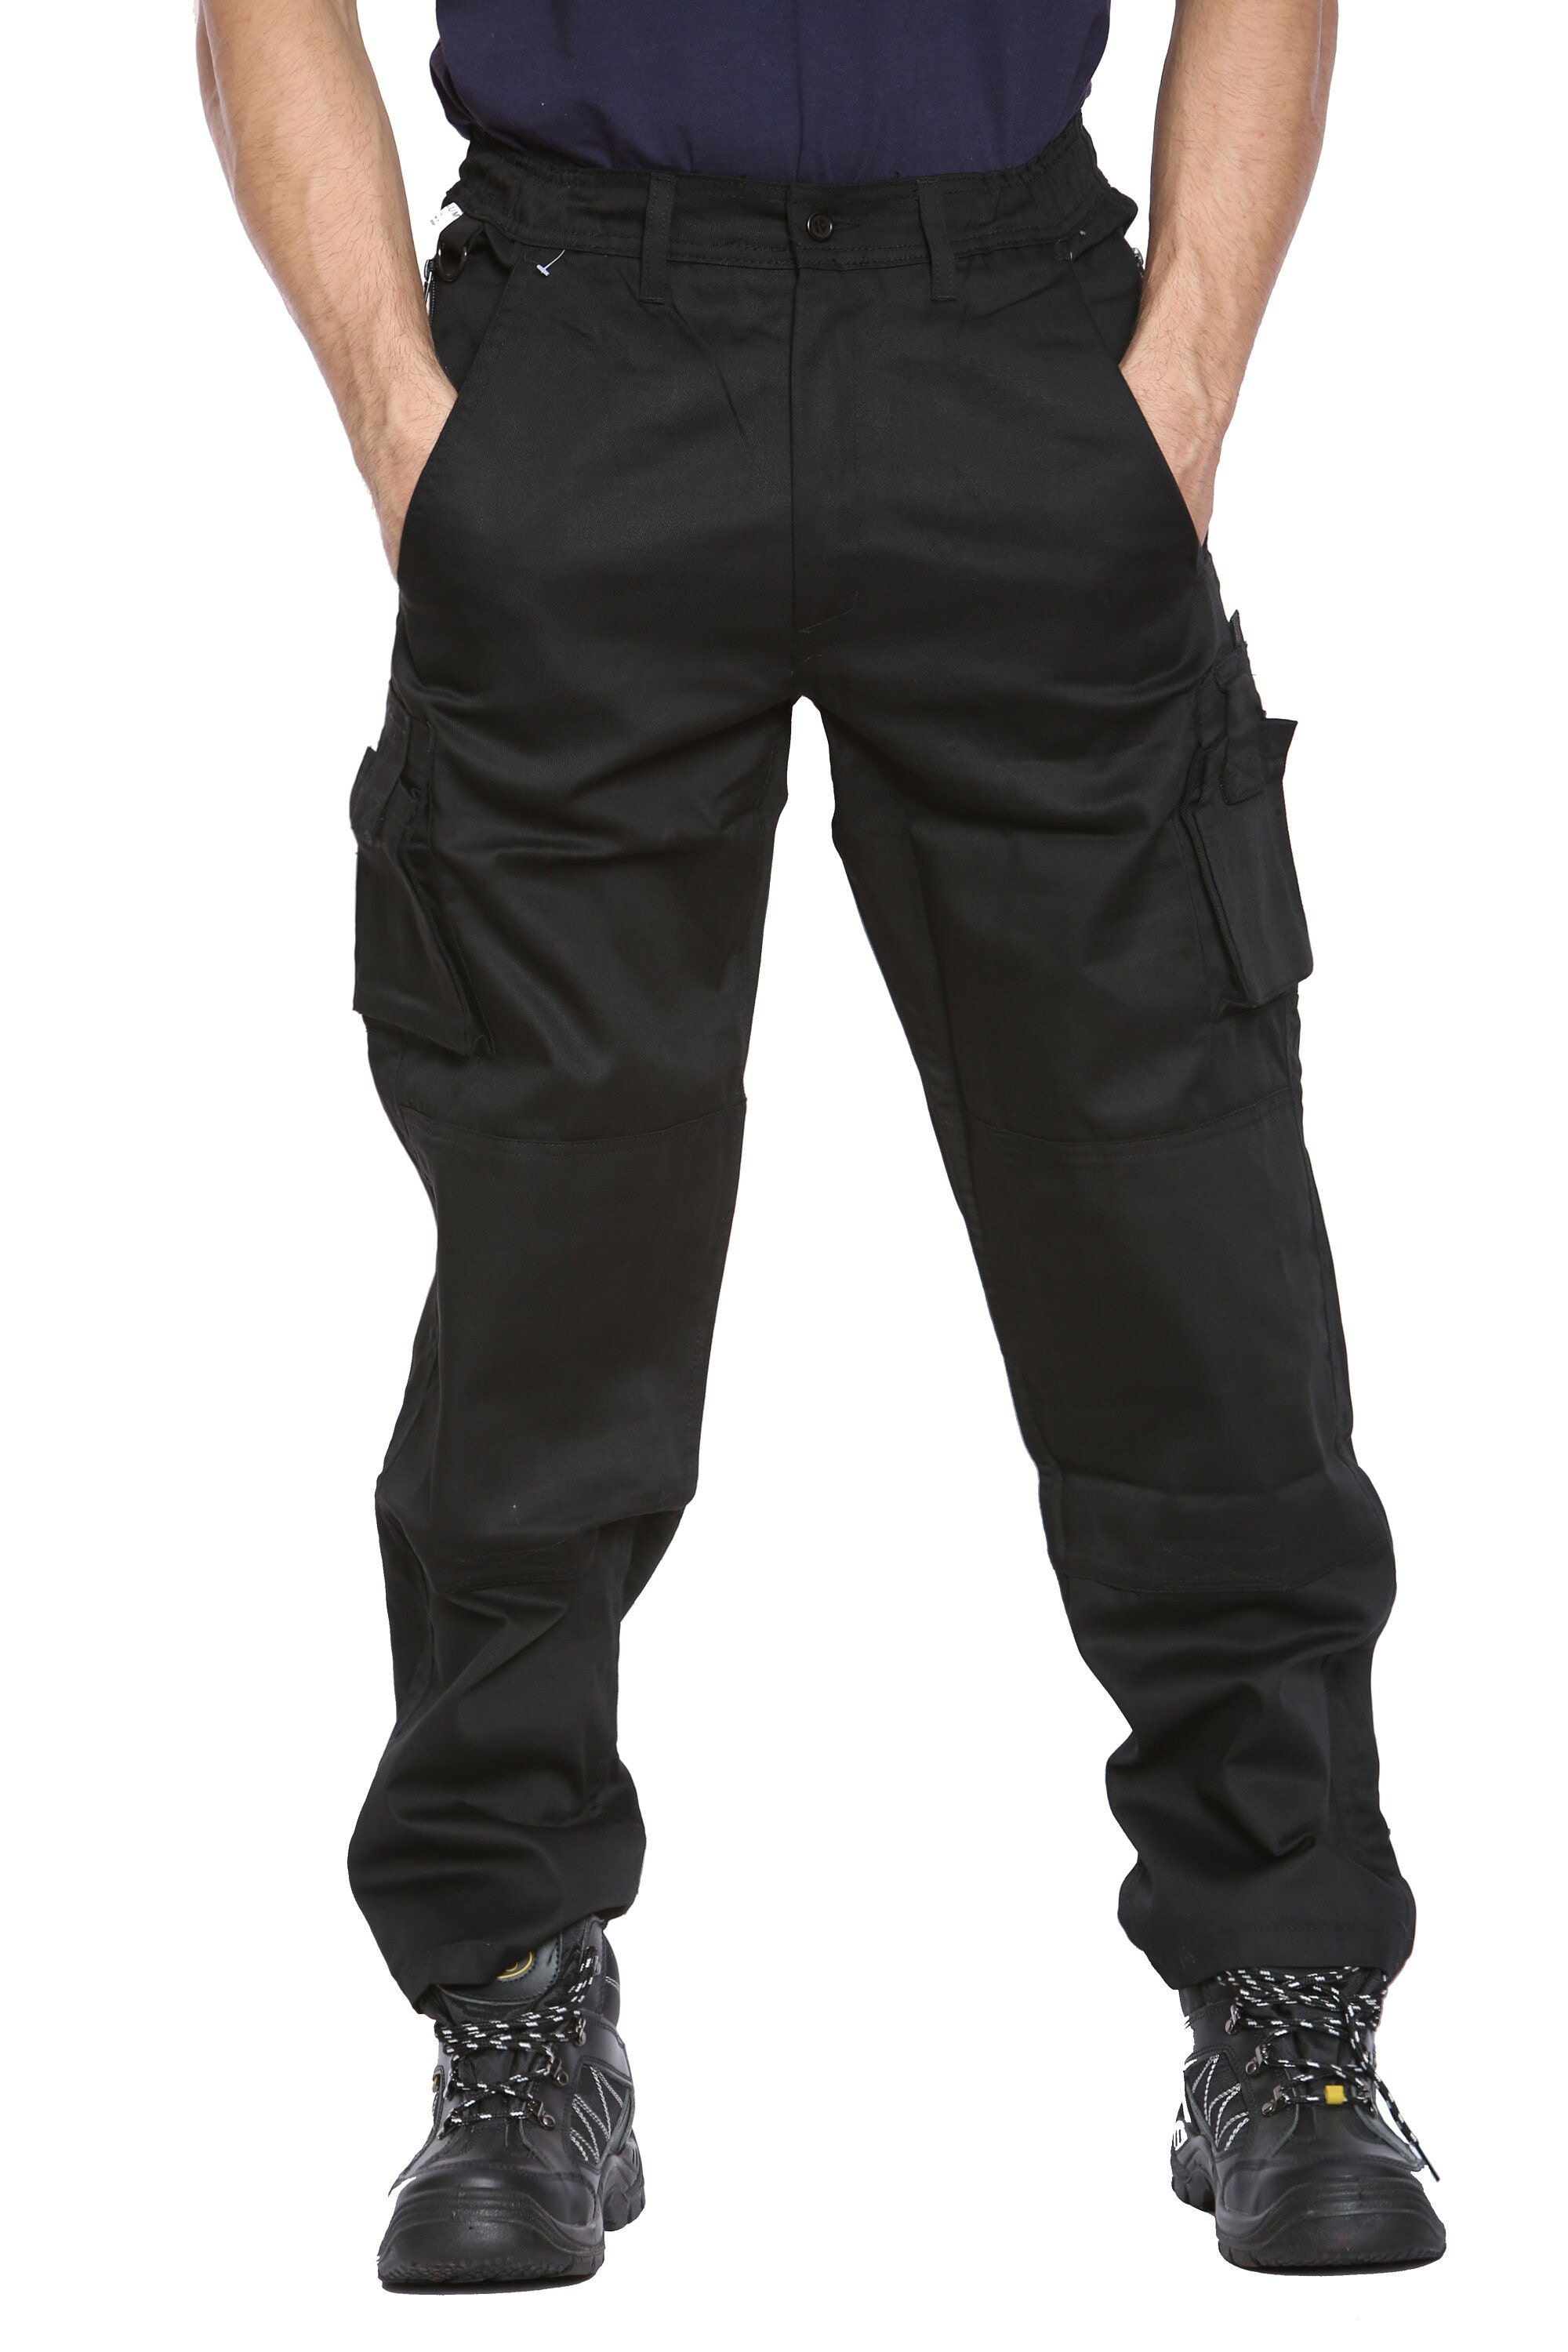 Molyveva Mens Cargo Combat Work Trousers Pants Sizes S to 5XL with Button & Zip